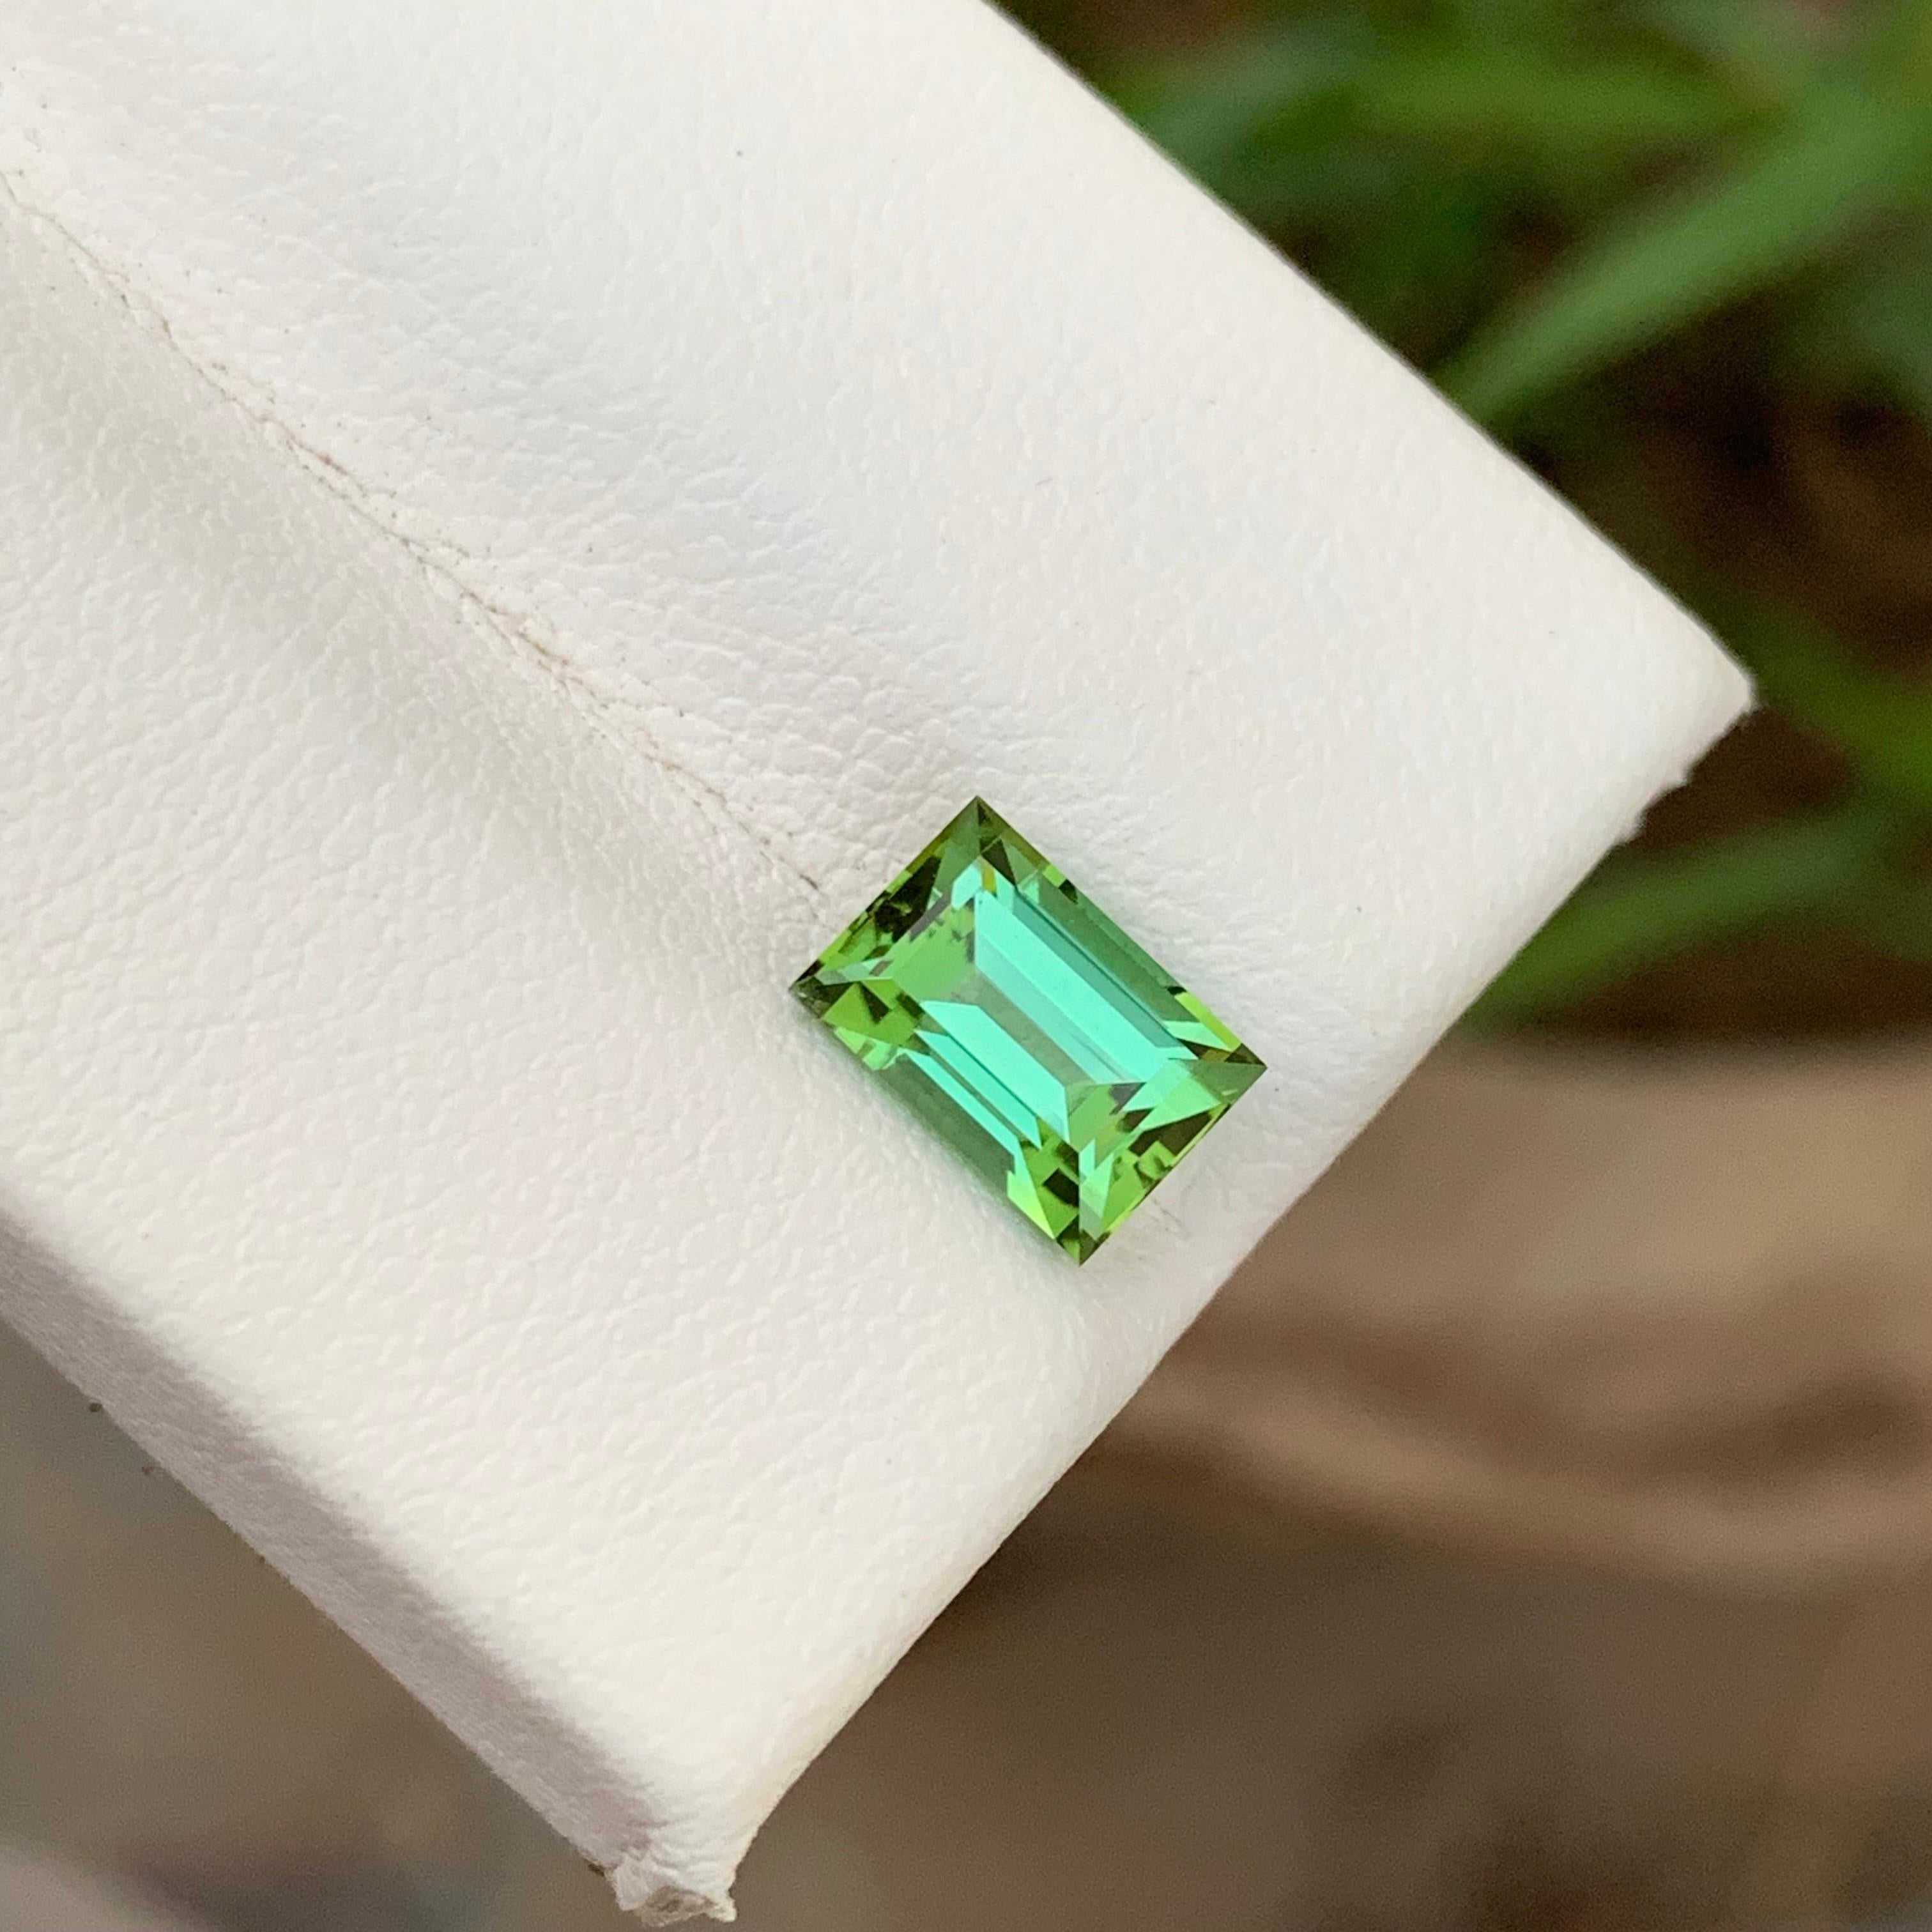 Loupe Clean 1.90 Carats Loose Green Tourmaline With Lagoon Shade Baguette Cut For Sale 2